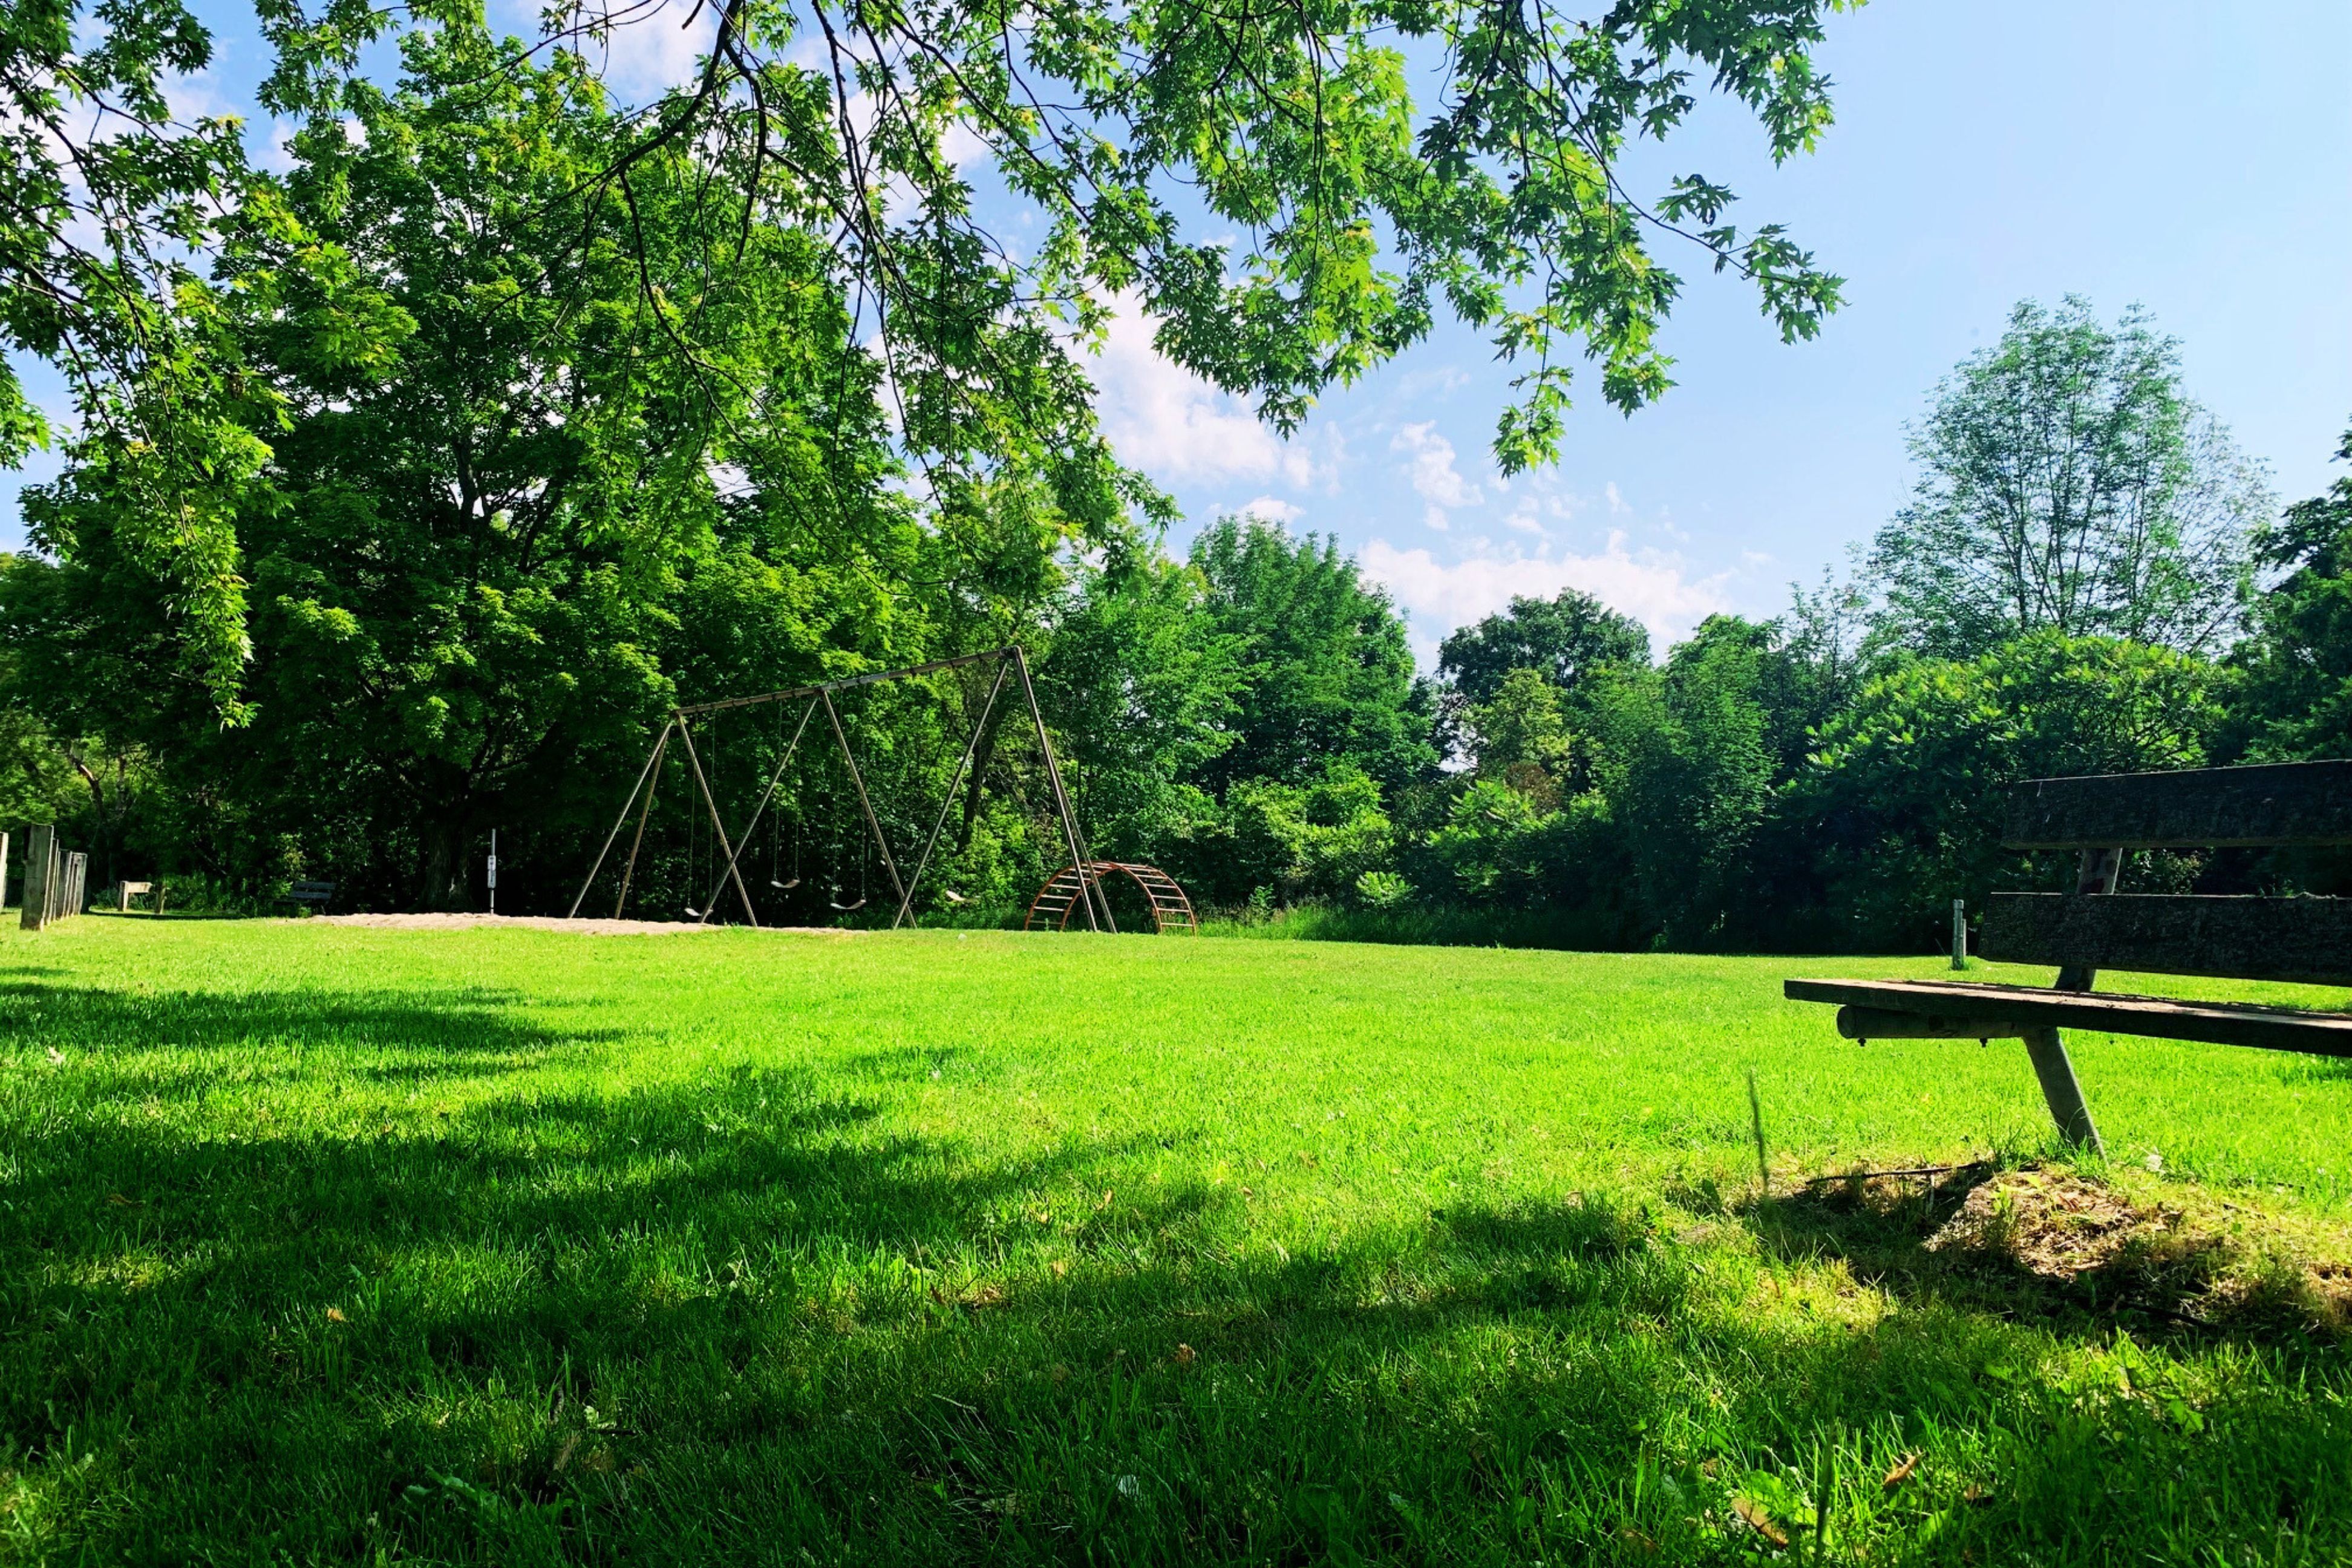 Green grass, with trees, a park bench and swing set in the back